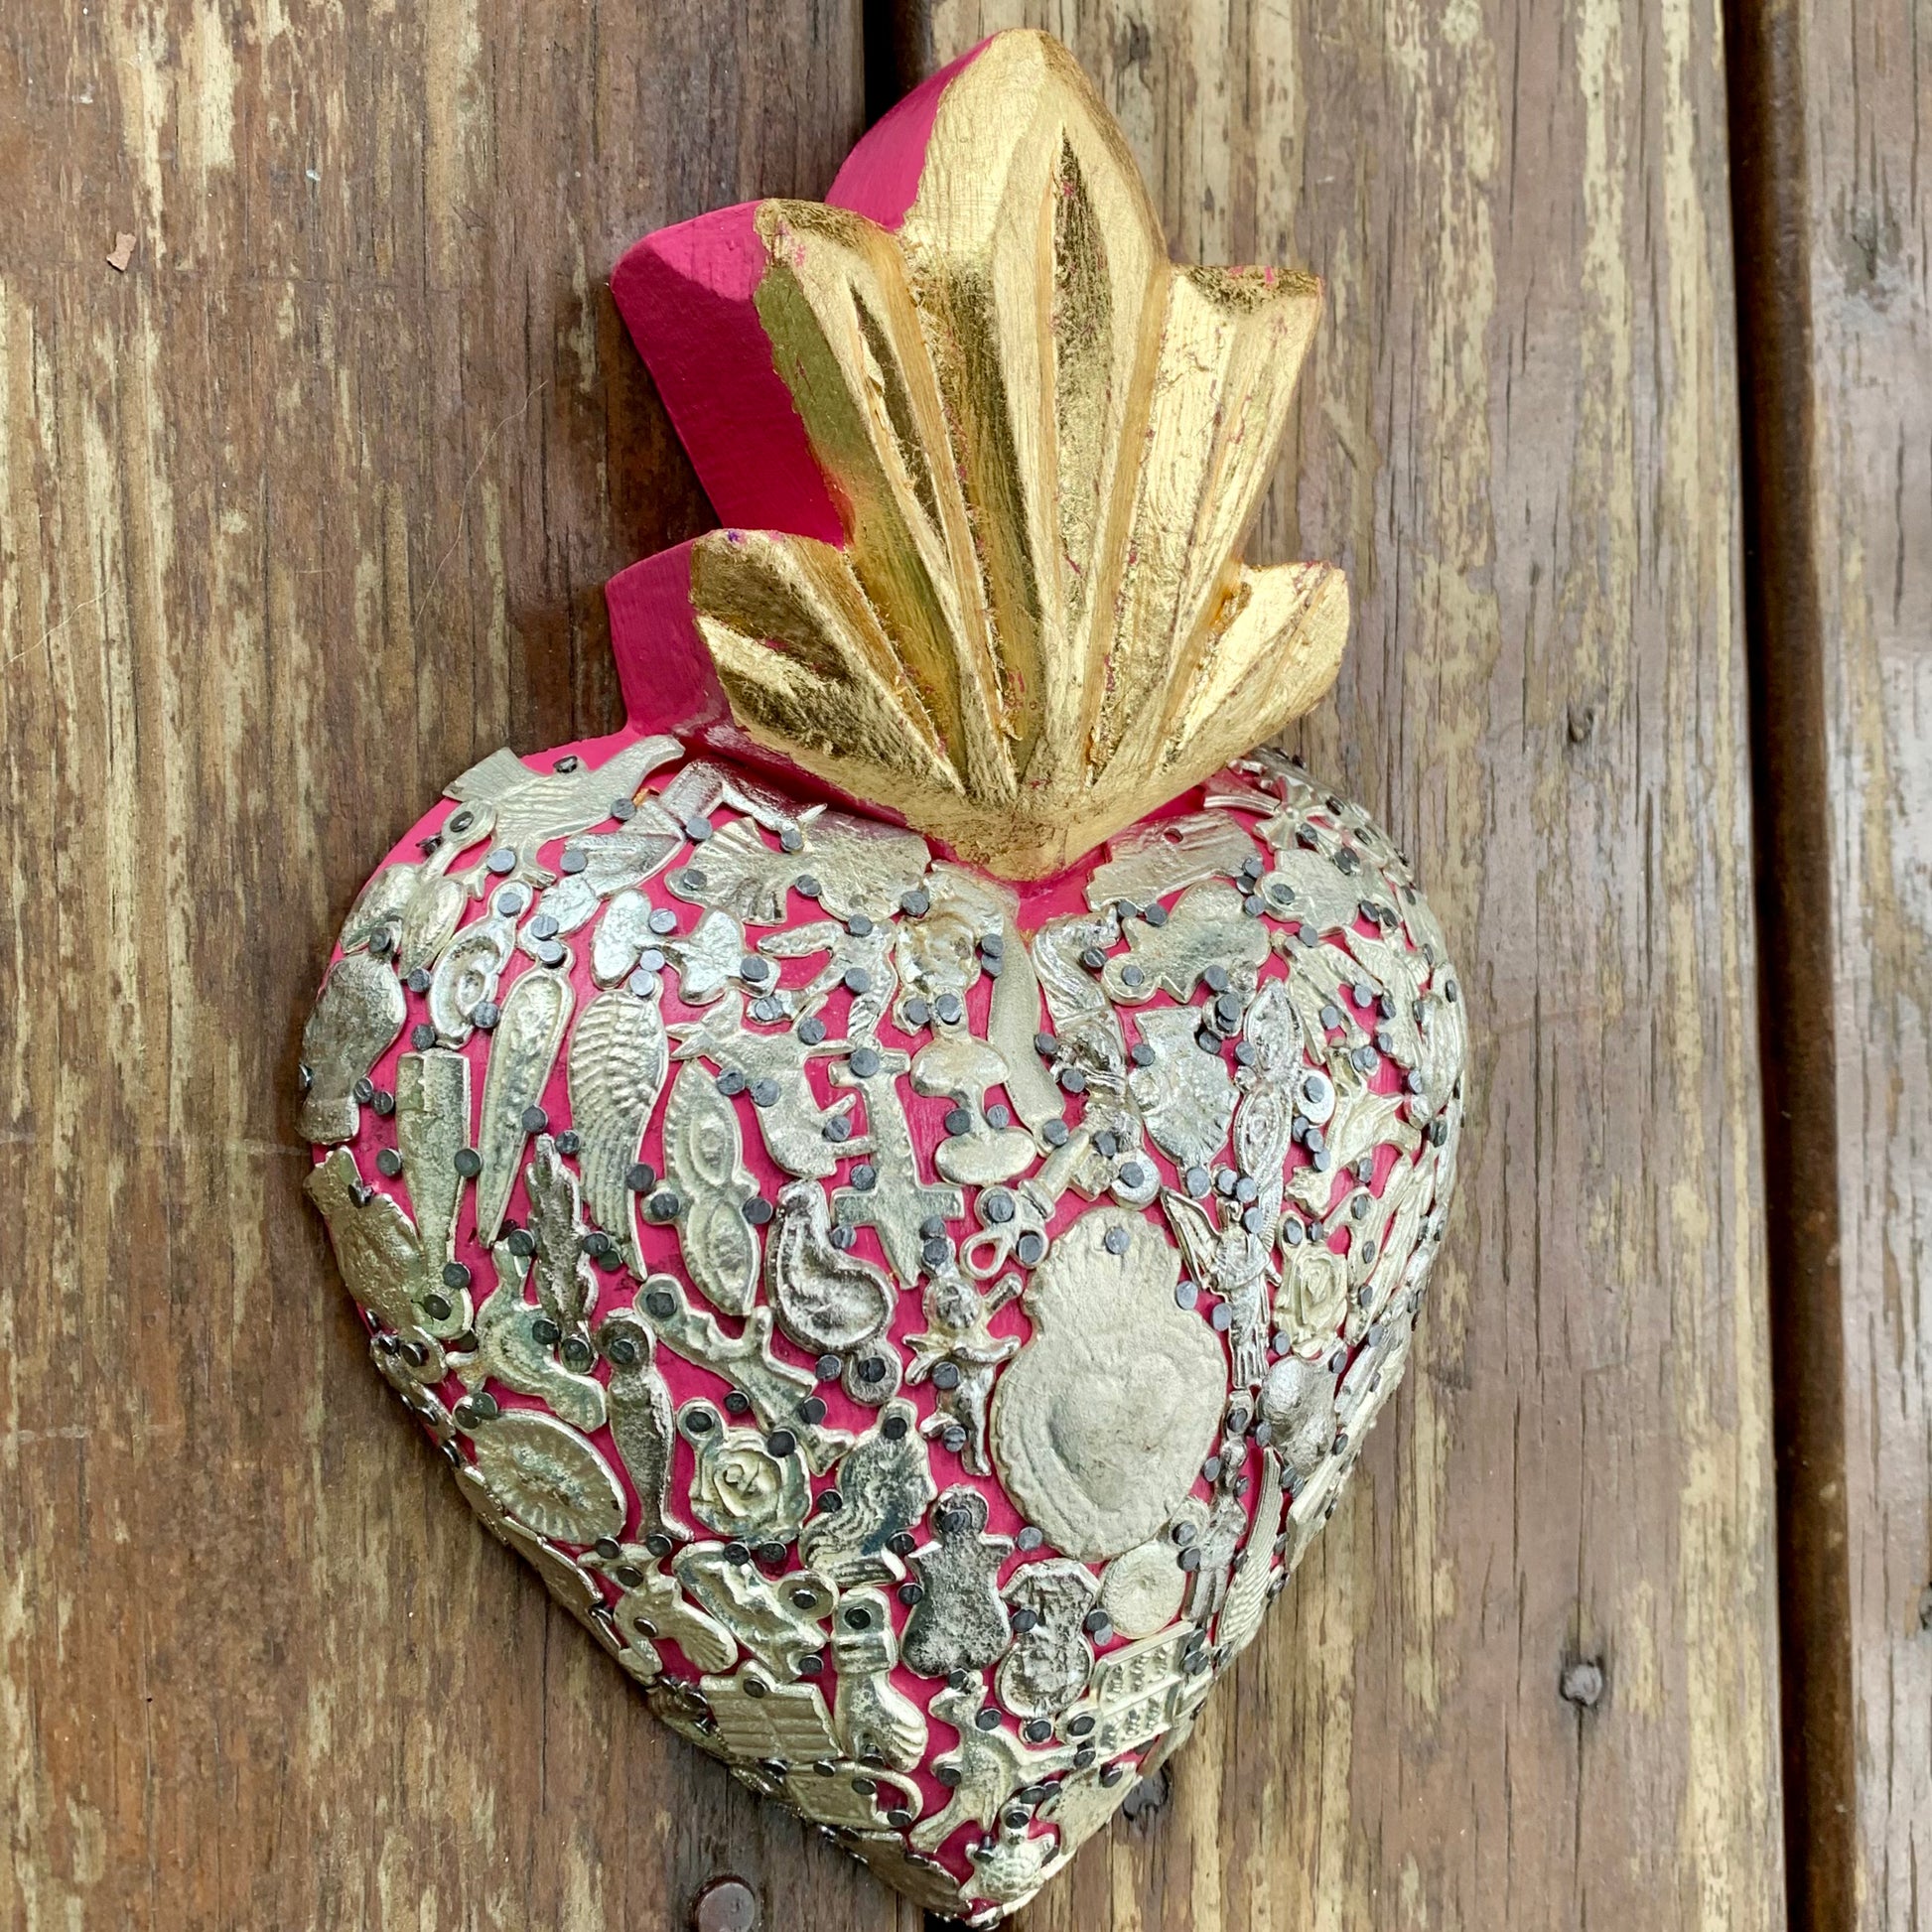 Mexican Milagros sacred wood heart Corazon